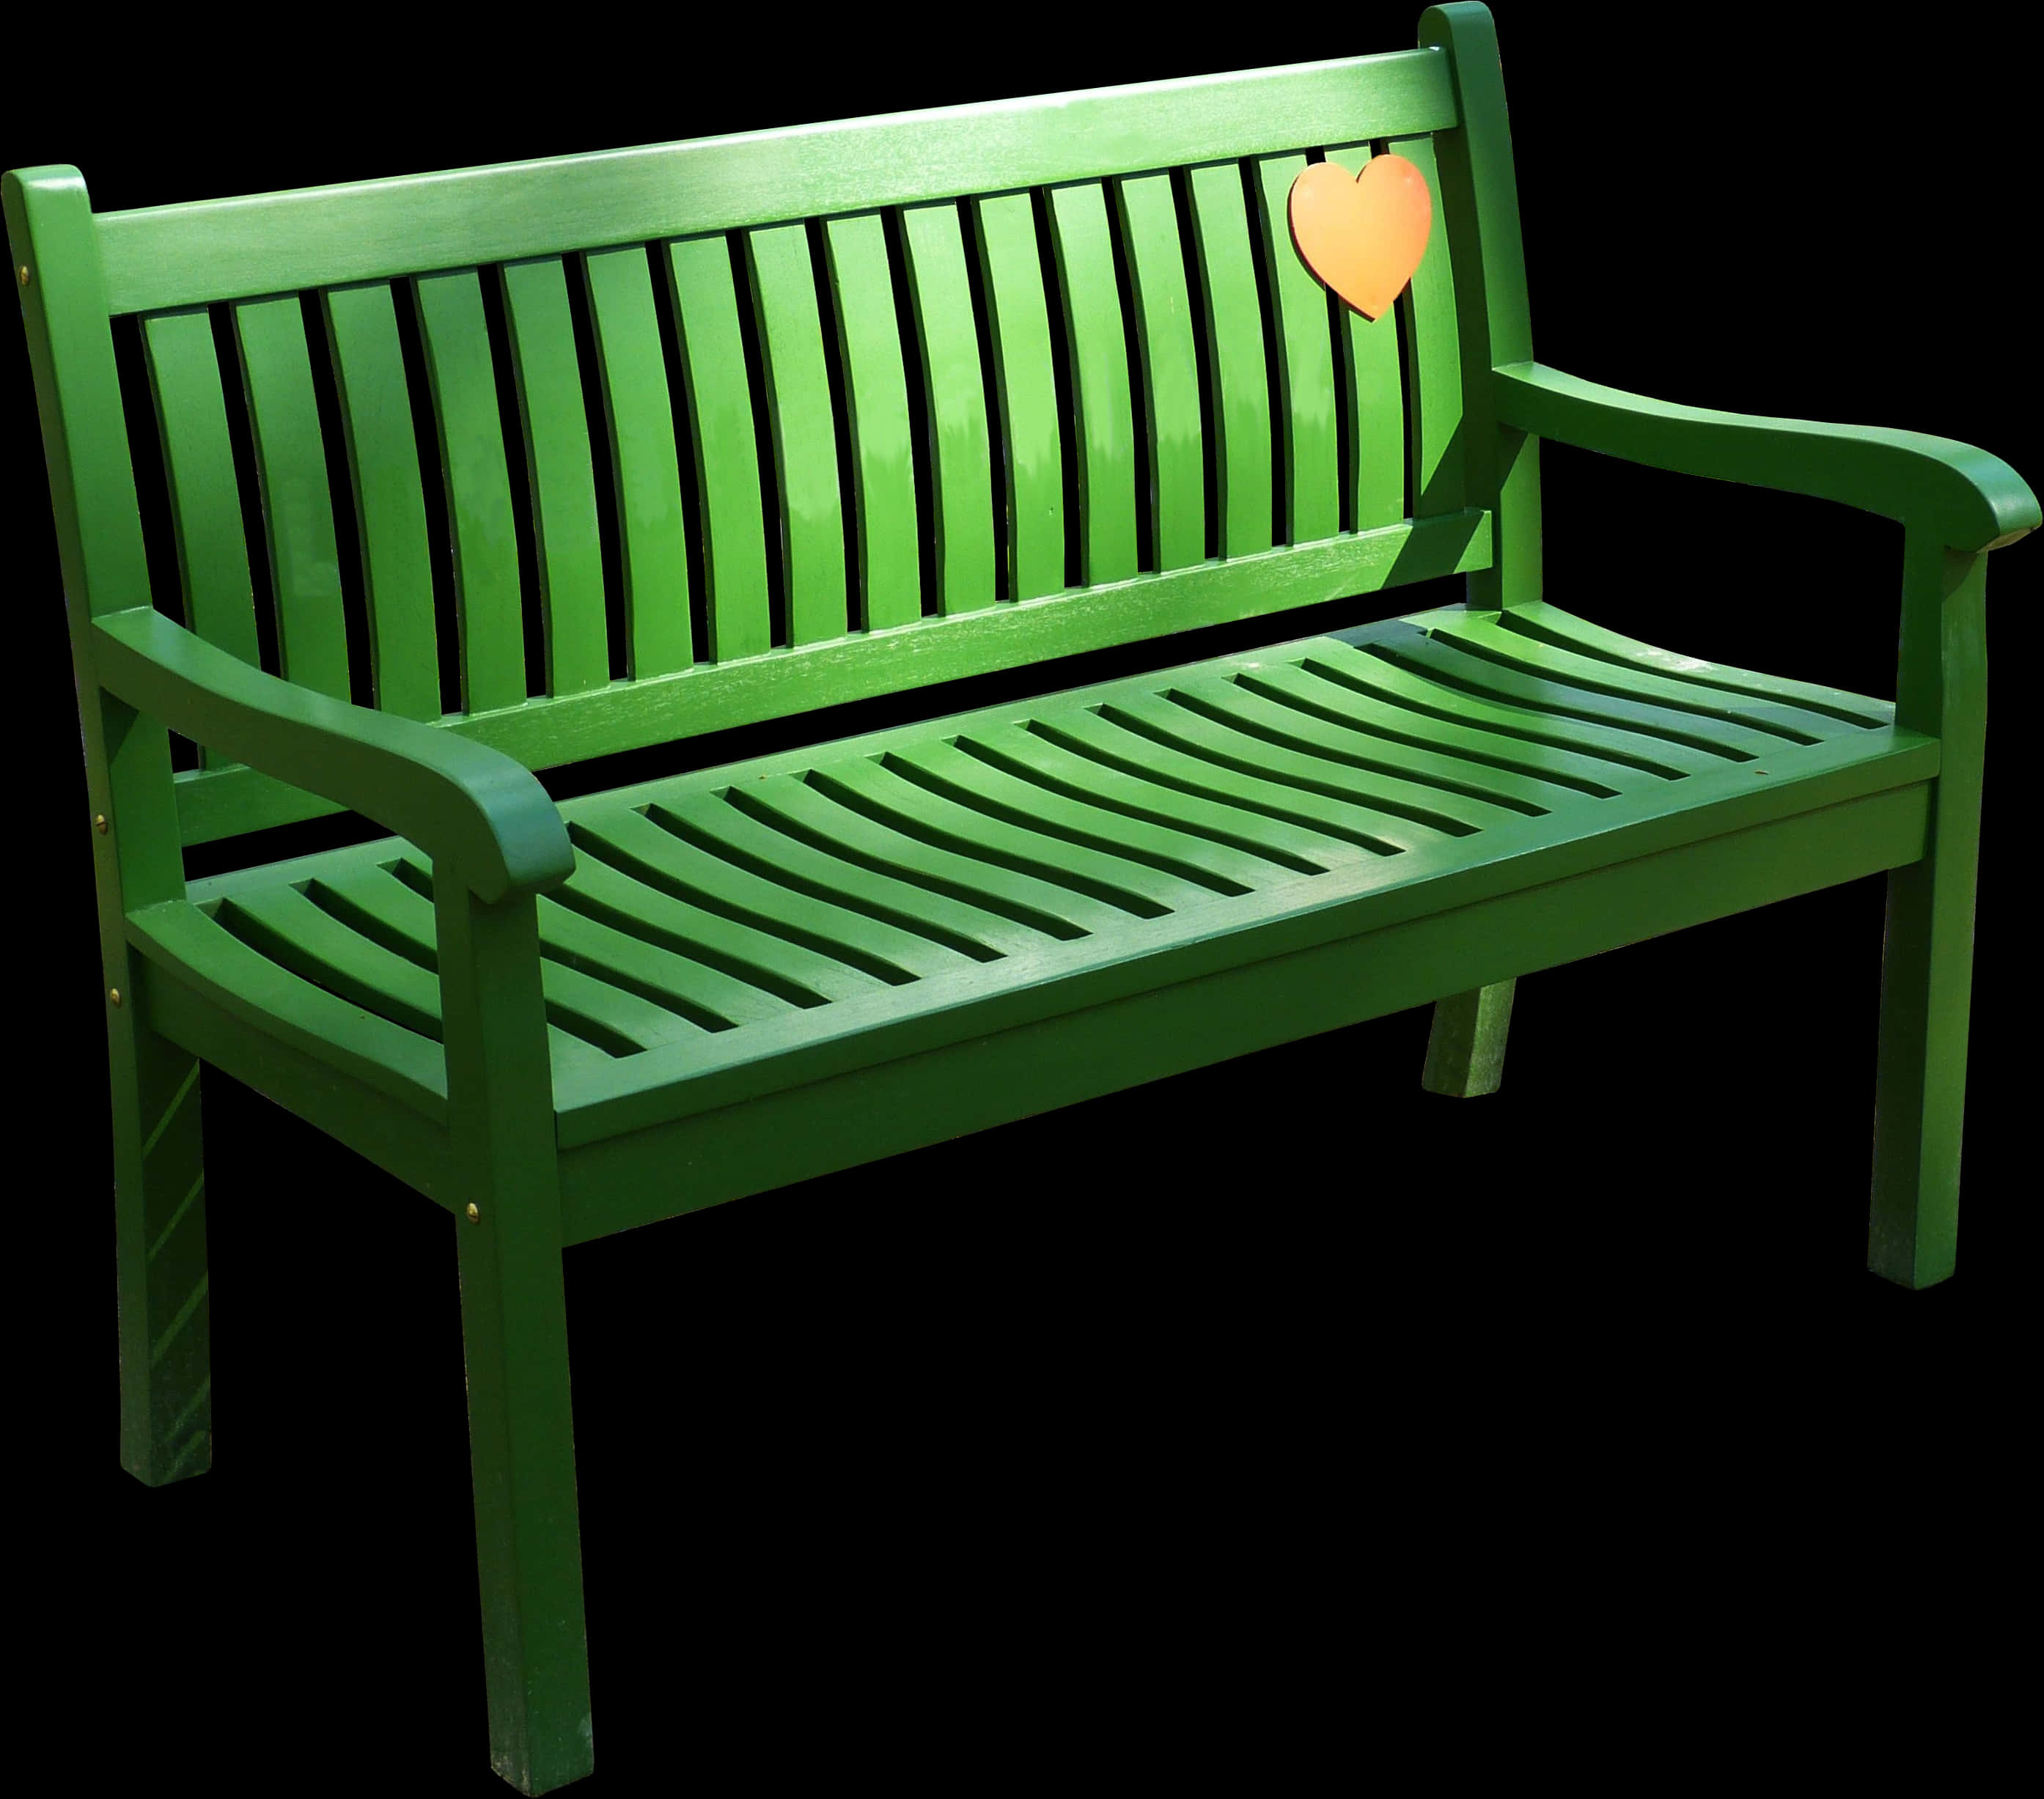 A Green Bench With A Heart On The Back